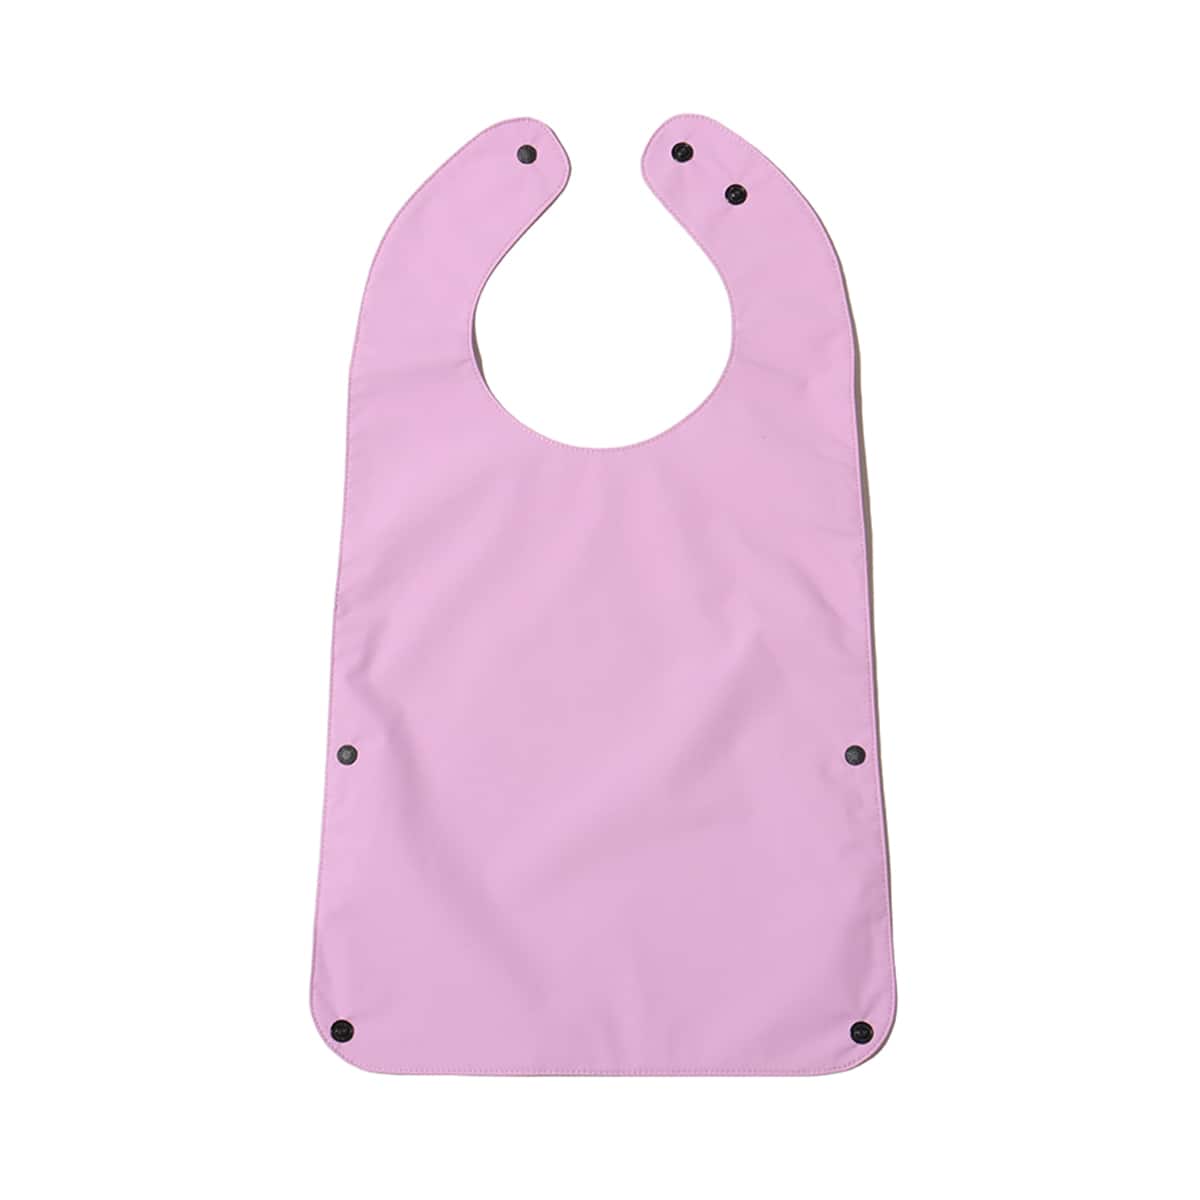 "THE NORTH FACE Baby Compact Yummy Bib"